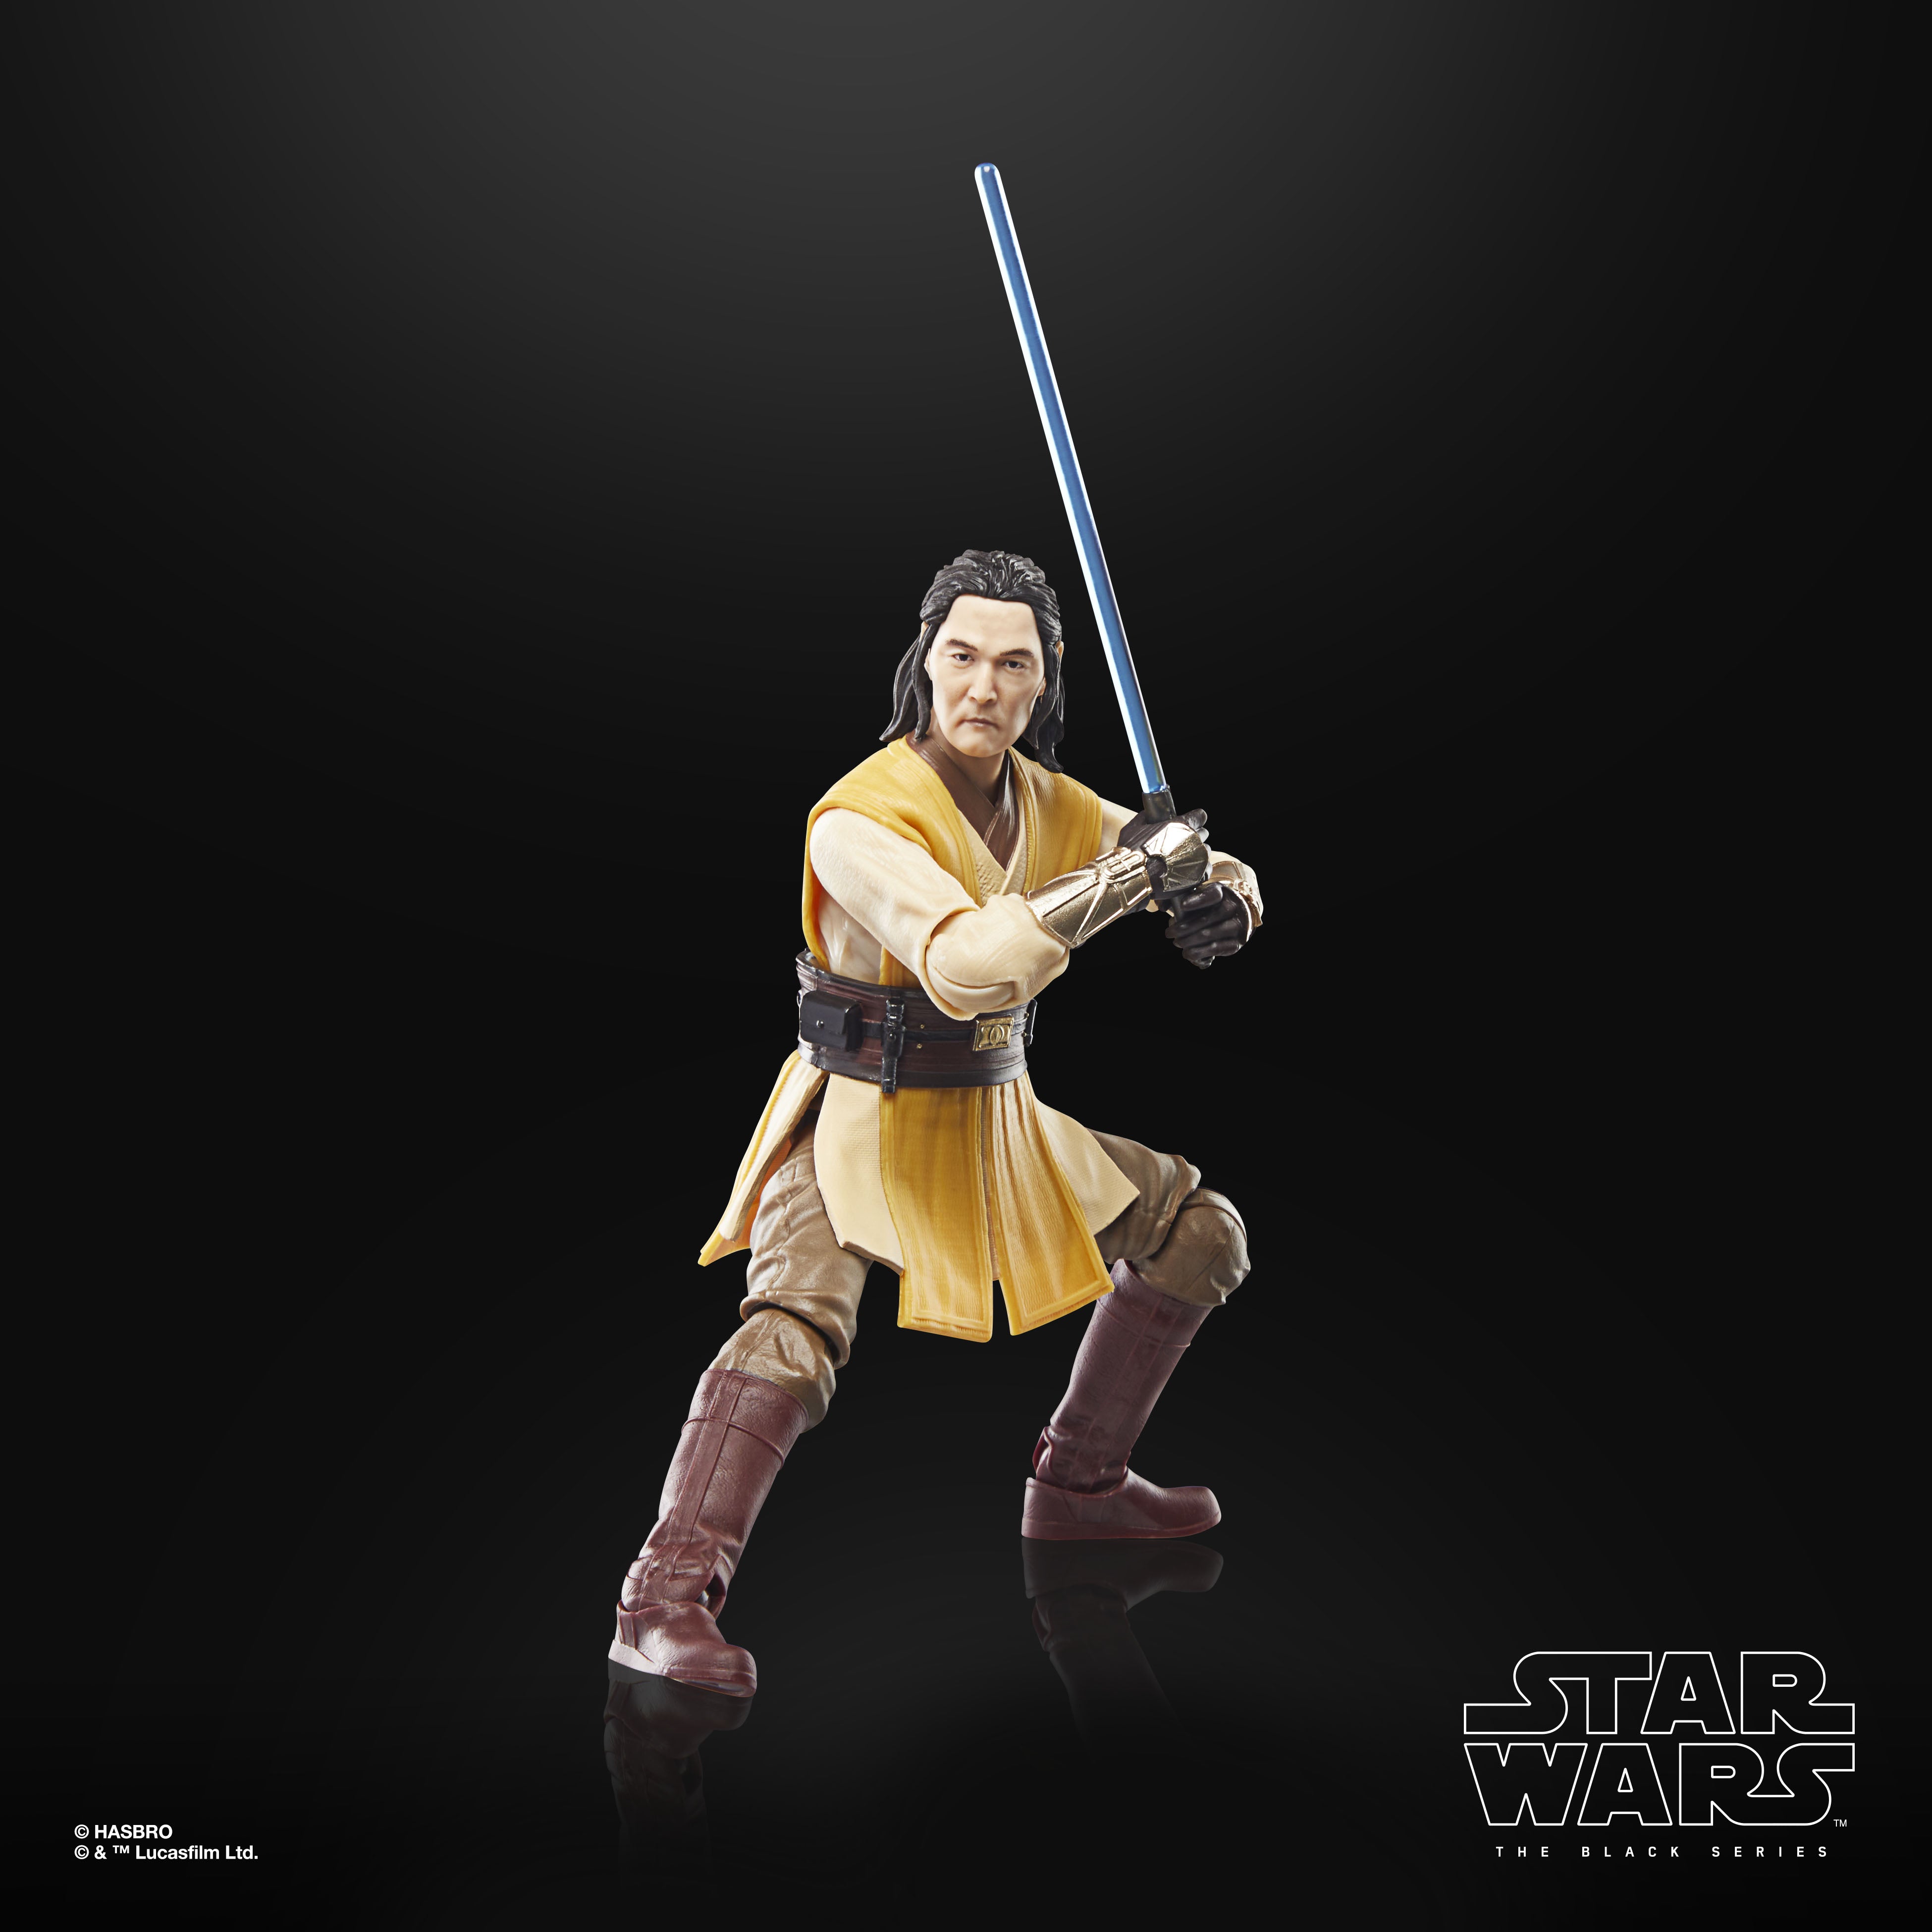 Star Wars The Black Series: The Acolyte - Jedi Master Sol